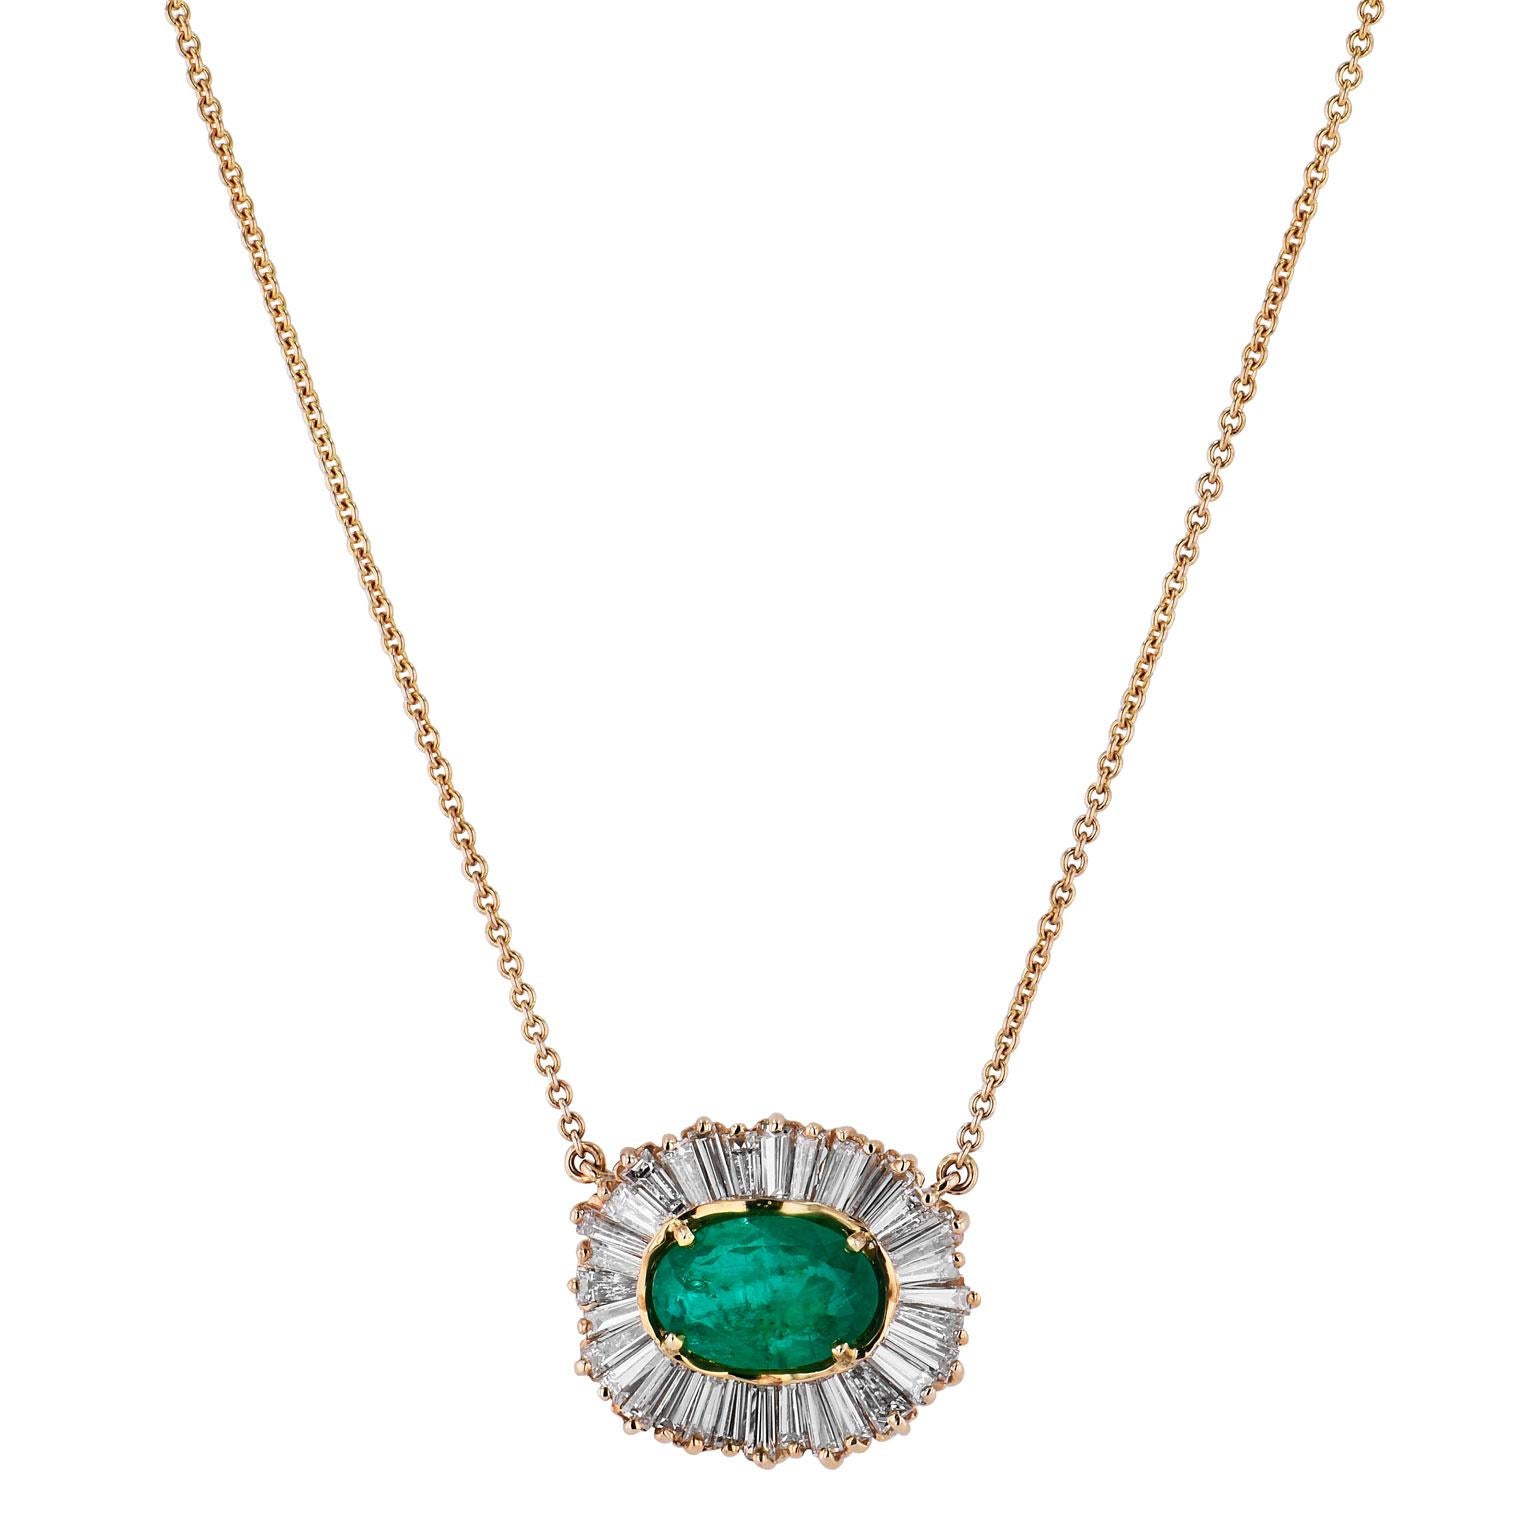 Estate Ballerina Emerald Diamond Baguette Pendant Necklace

This exquisite 2.81 carat emerald is surrounded by approximately 2.75 carats of H/I color, VS clarity diamonds. 

The pendant is made of 14 kt yellow gold and measures 20 mm wide x 17 mm